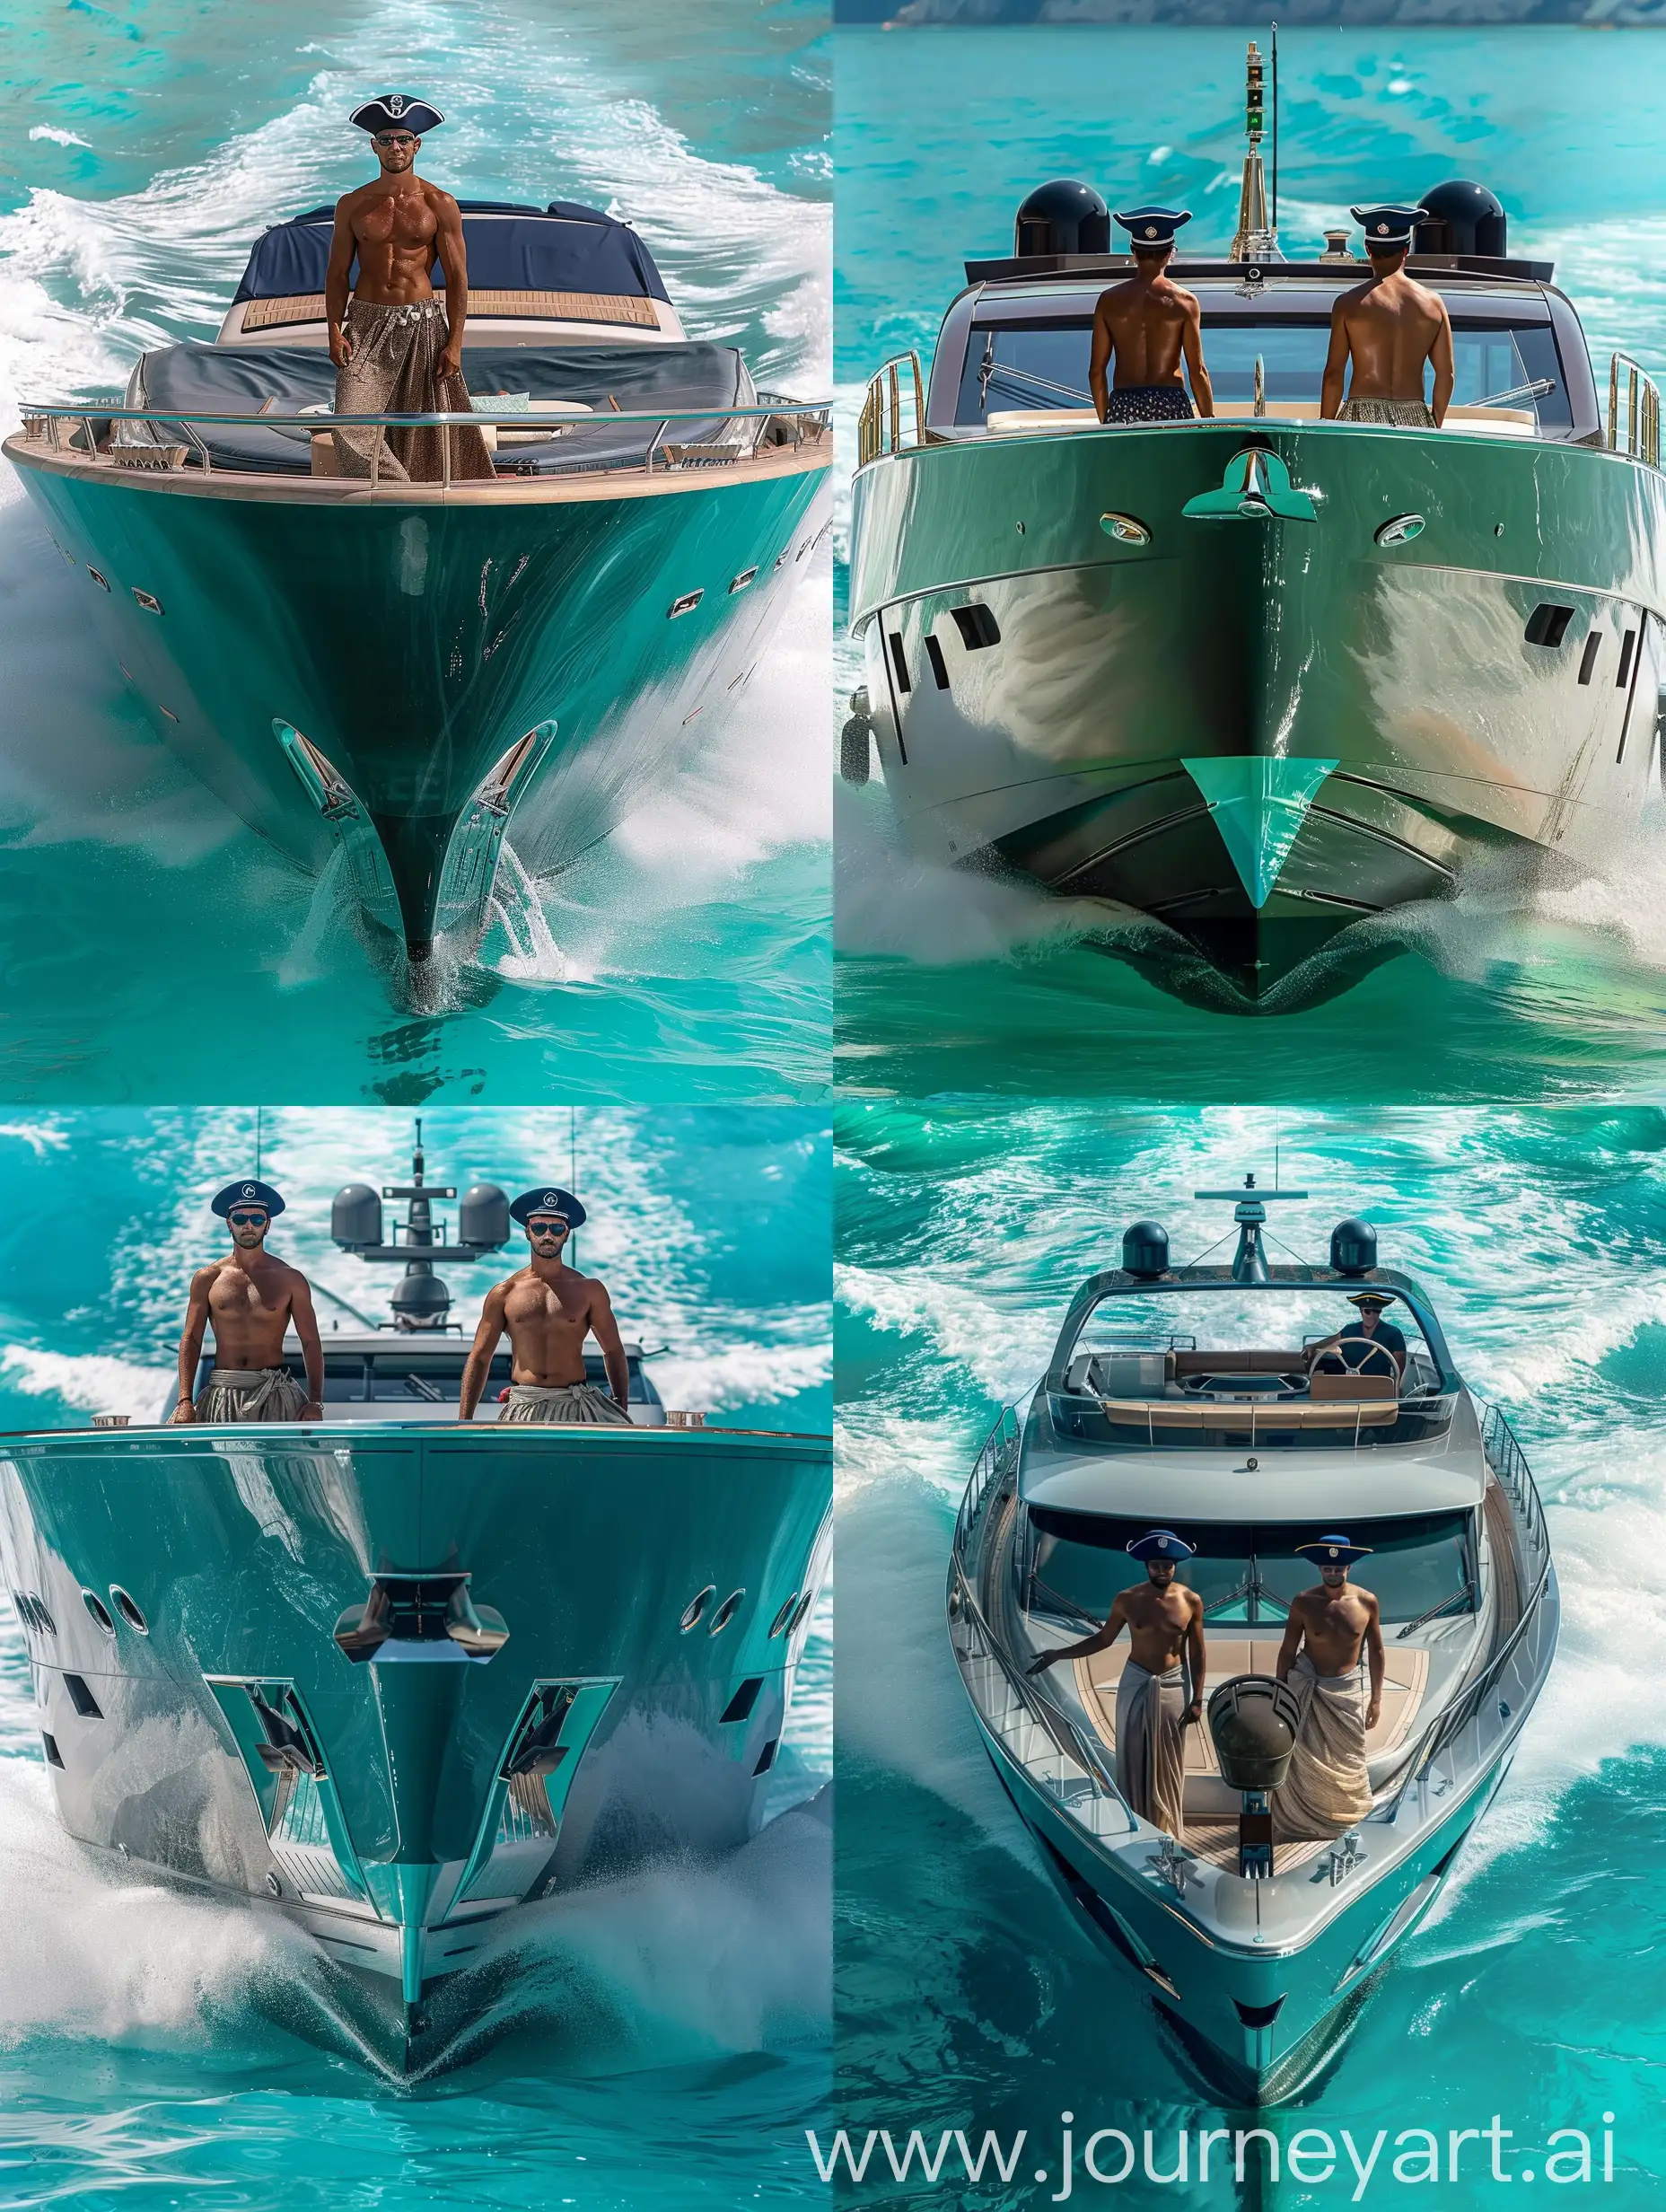 two men standing at the front of a large yacht. They are wearing navy captains hats and loose flowing beachwear. The boat is in a lake of brilliant turquoise water with waves crashing behind.